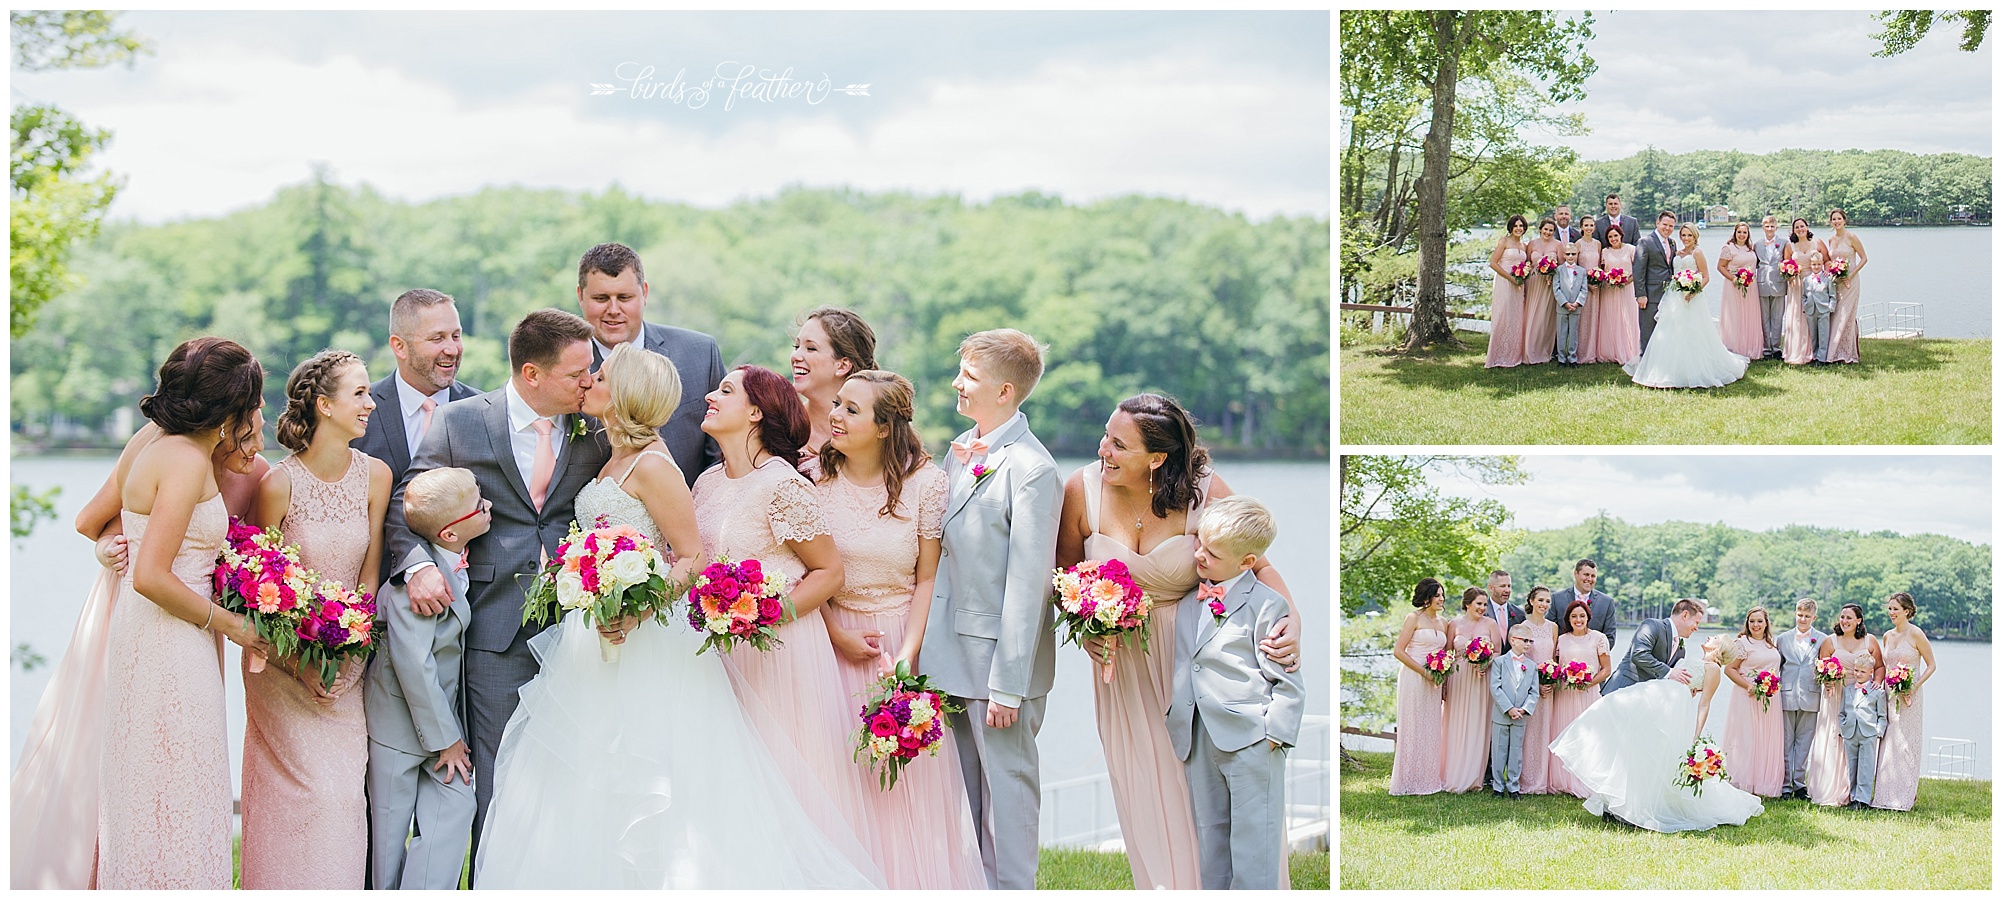 Birds of a Feather Photography, Woodloch Resort, Hawley Pa, Wedding Photography, Wedding Photographer